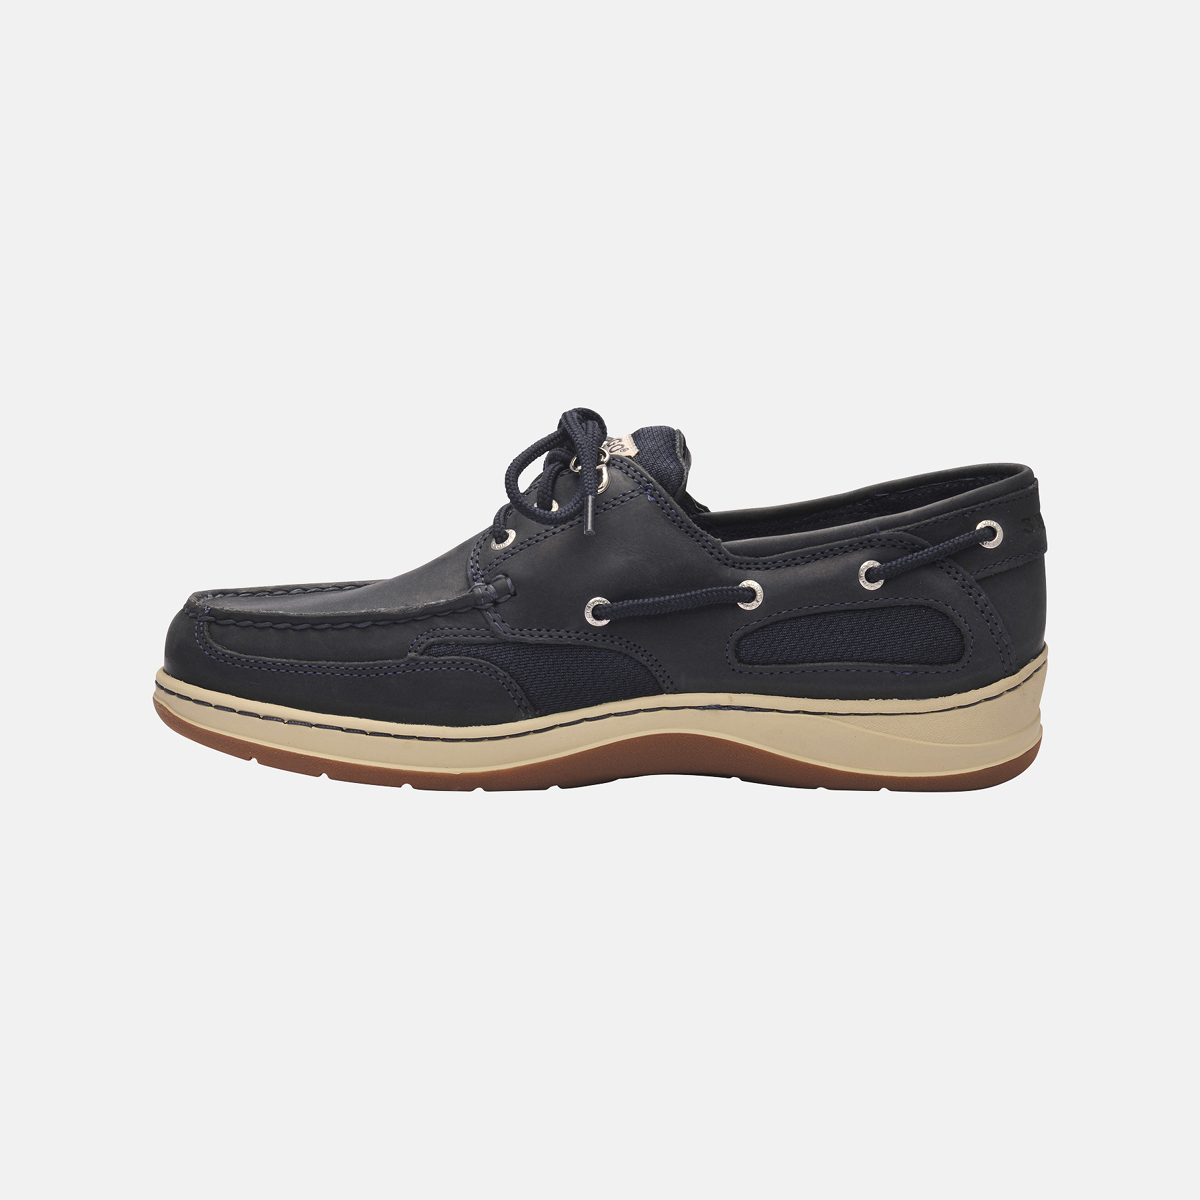 Sebago Clovehitch II chaussures bateau homme blue navy leather, taille 44 (US 10)